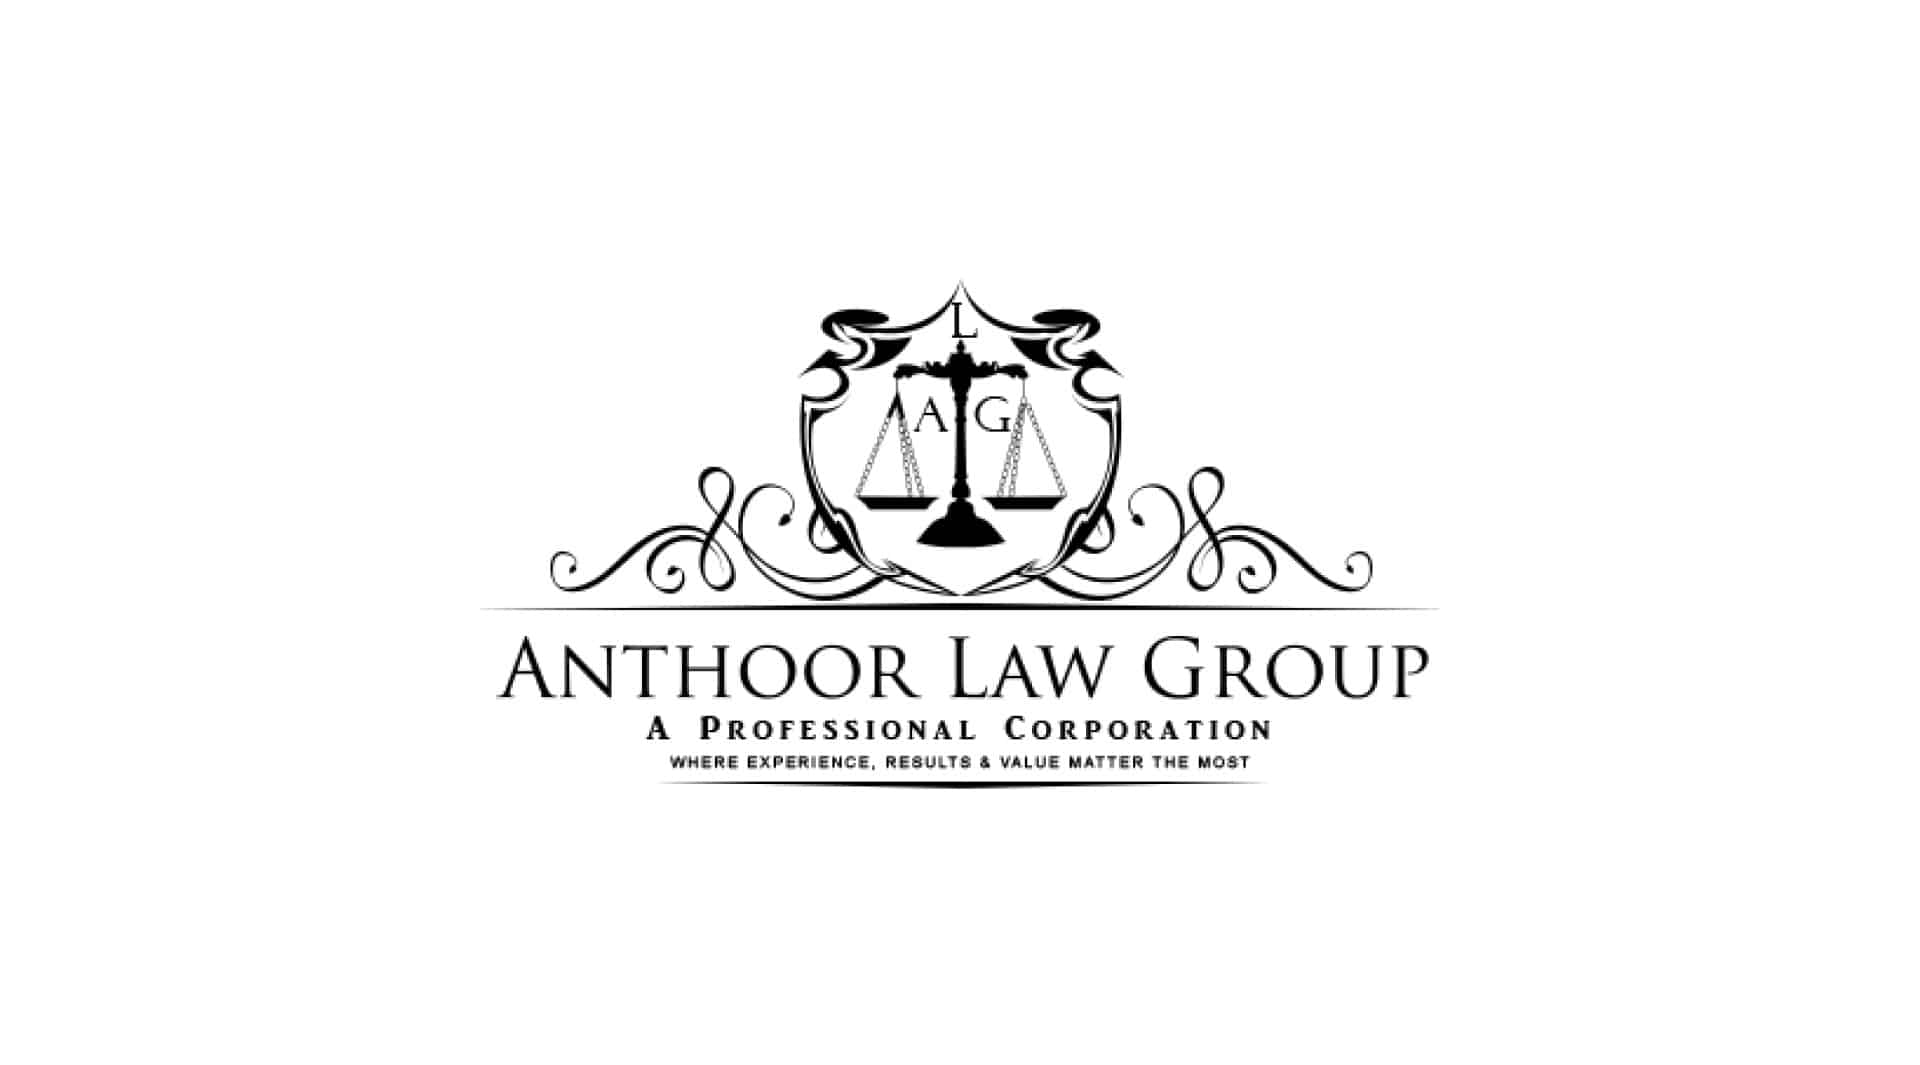 Anthoor Law Group - A Professional Corporation